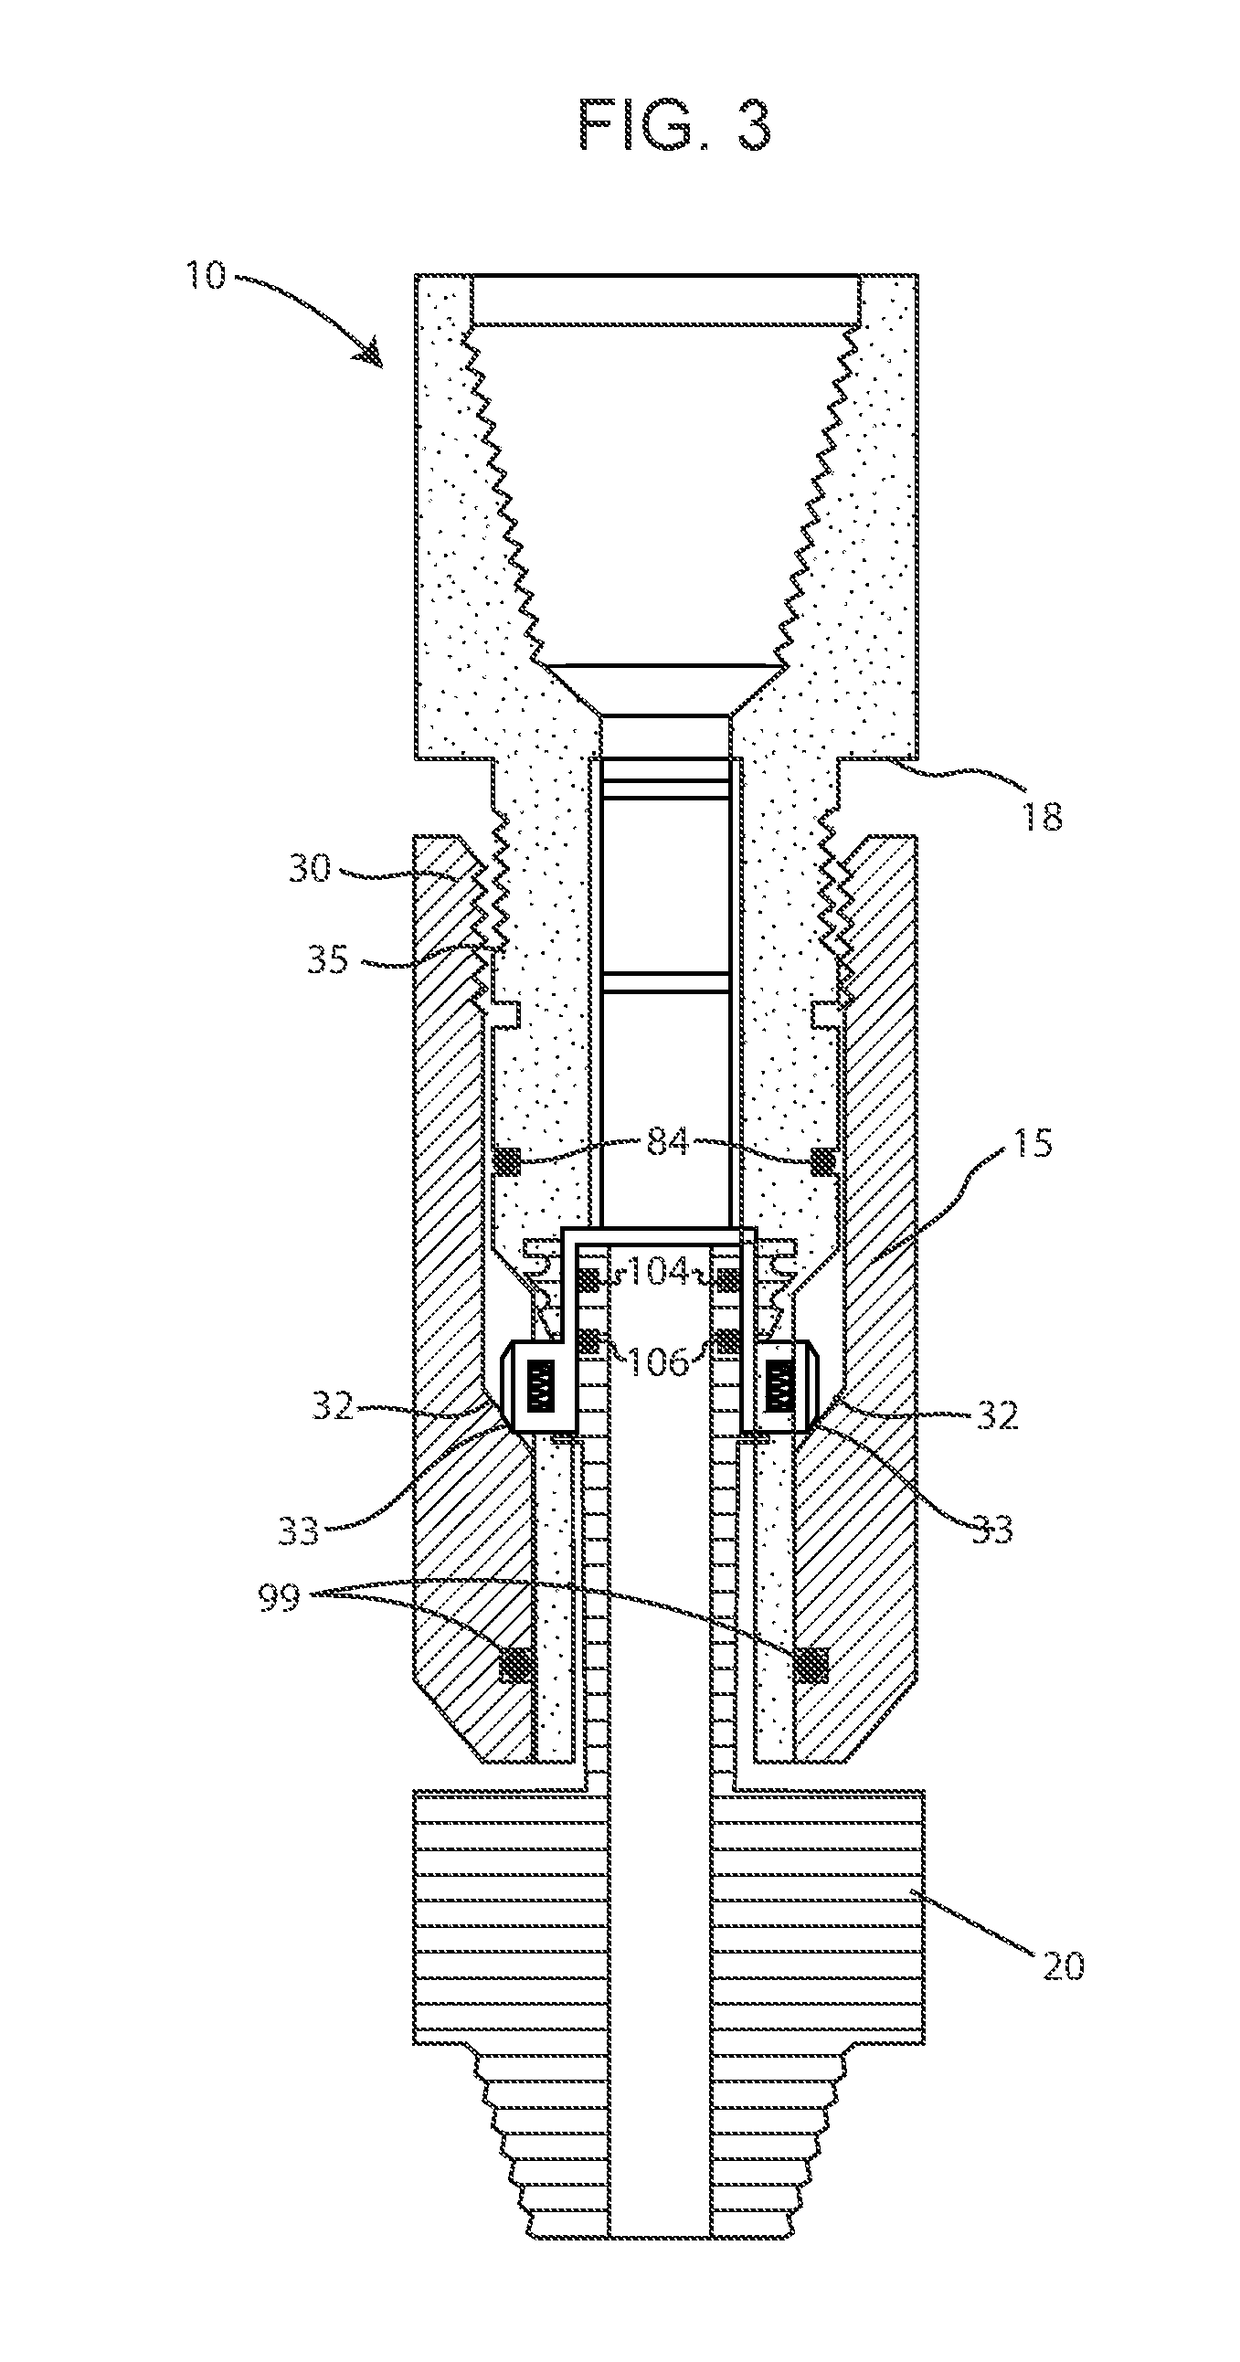 Manual Pipe Valve Connector for Jointed Pipe Connections with Quick Release Check Valve Assembly and Uses Thereof